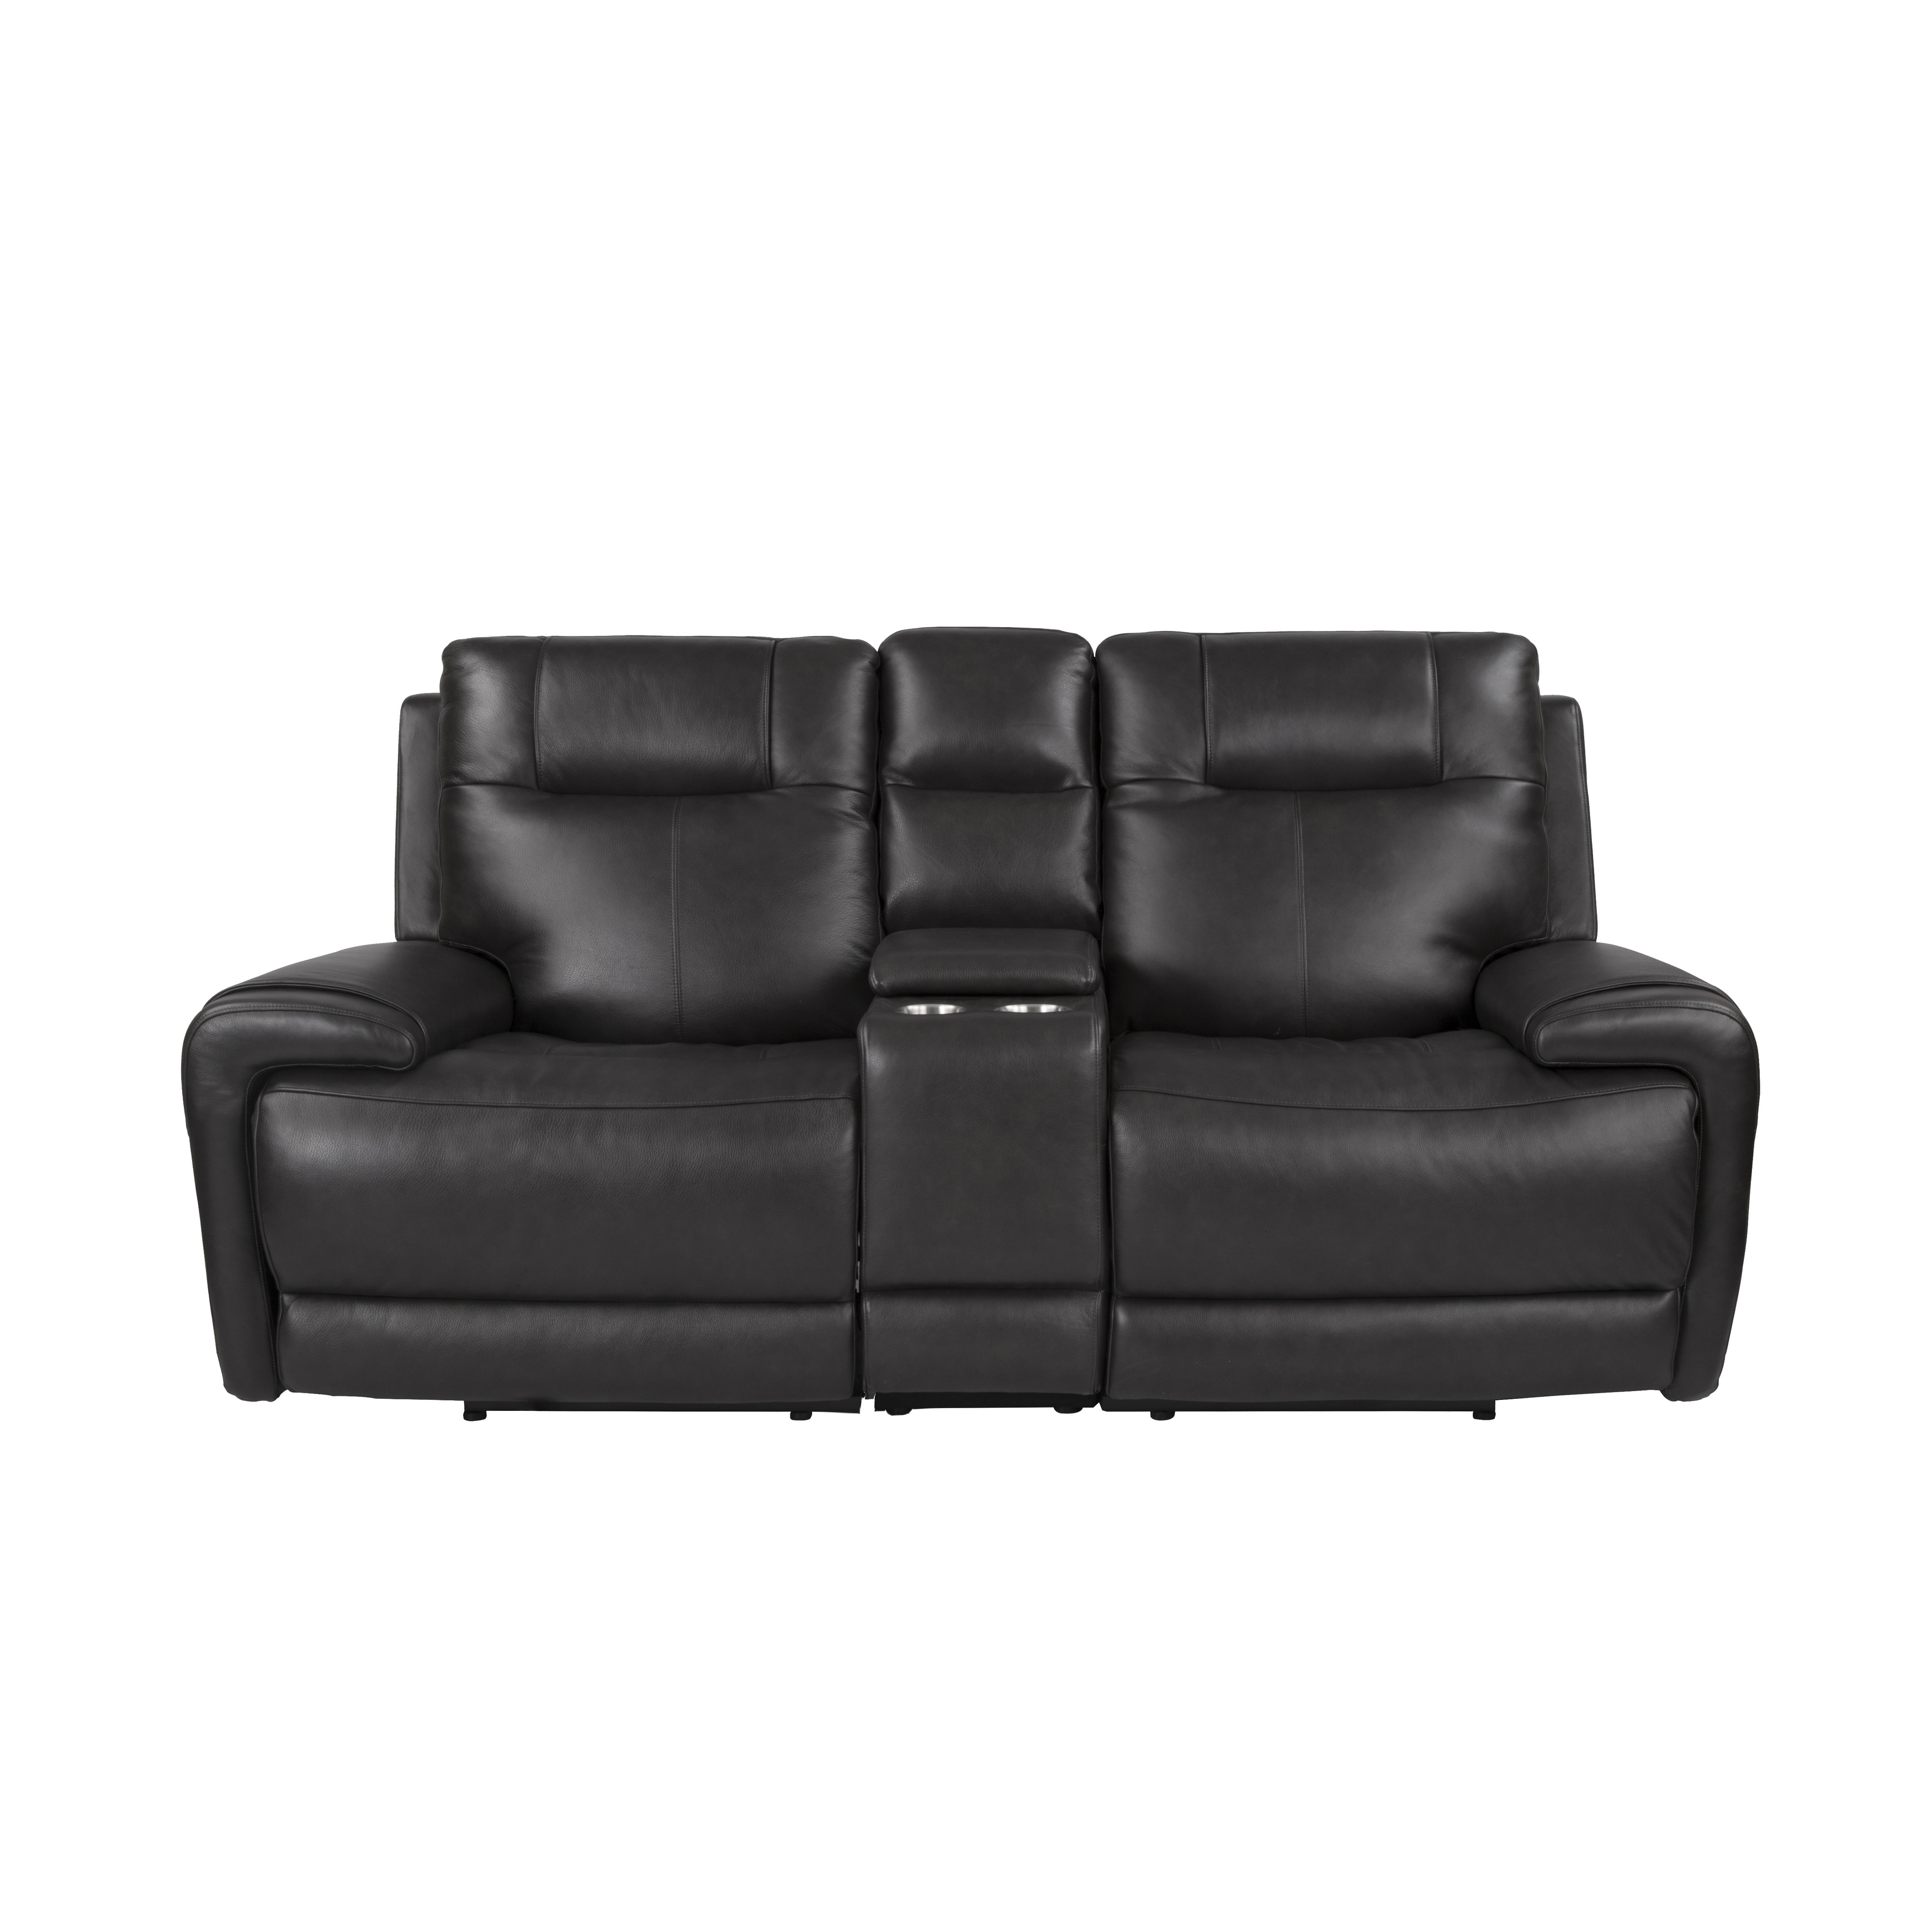 Urlivingroom Genuine Leather Power Recliner Loveseat With Center Console Storage  Usb Charge Port - 82.5“w*41.5d*40.5h